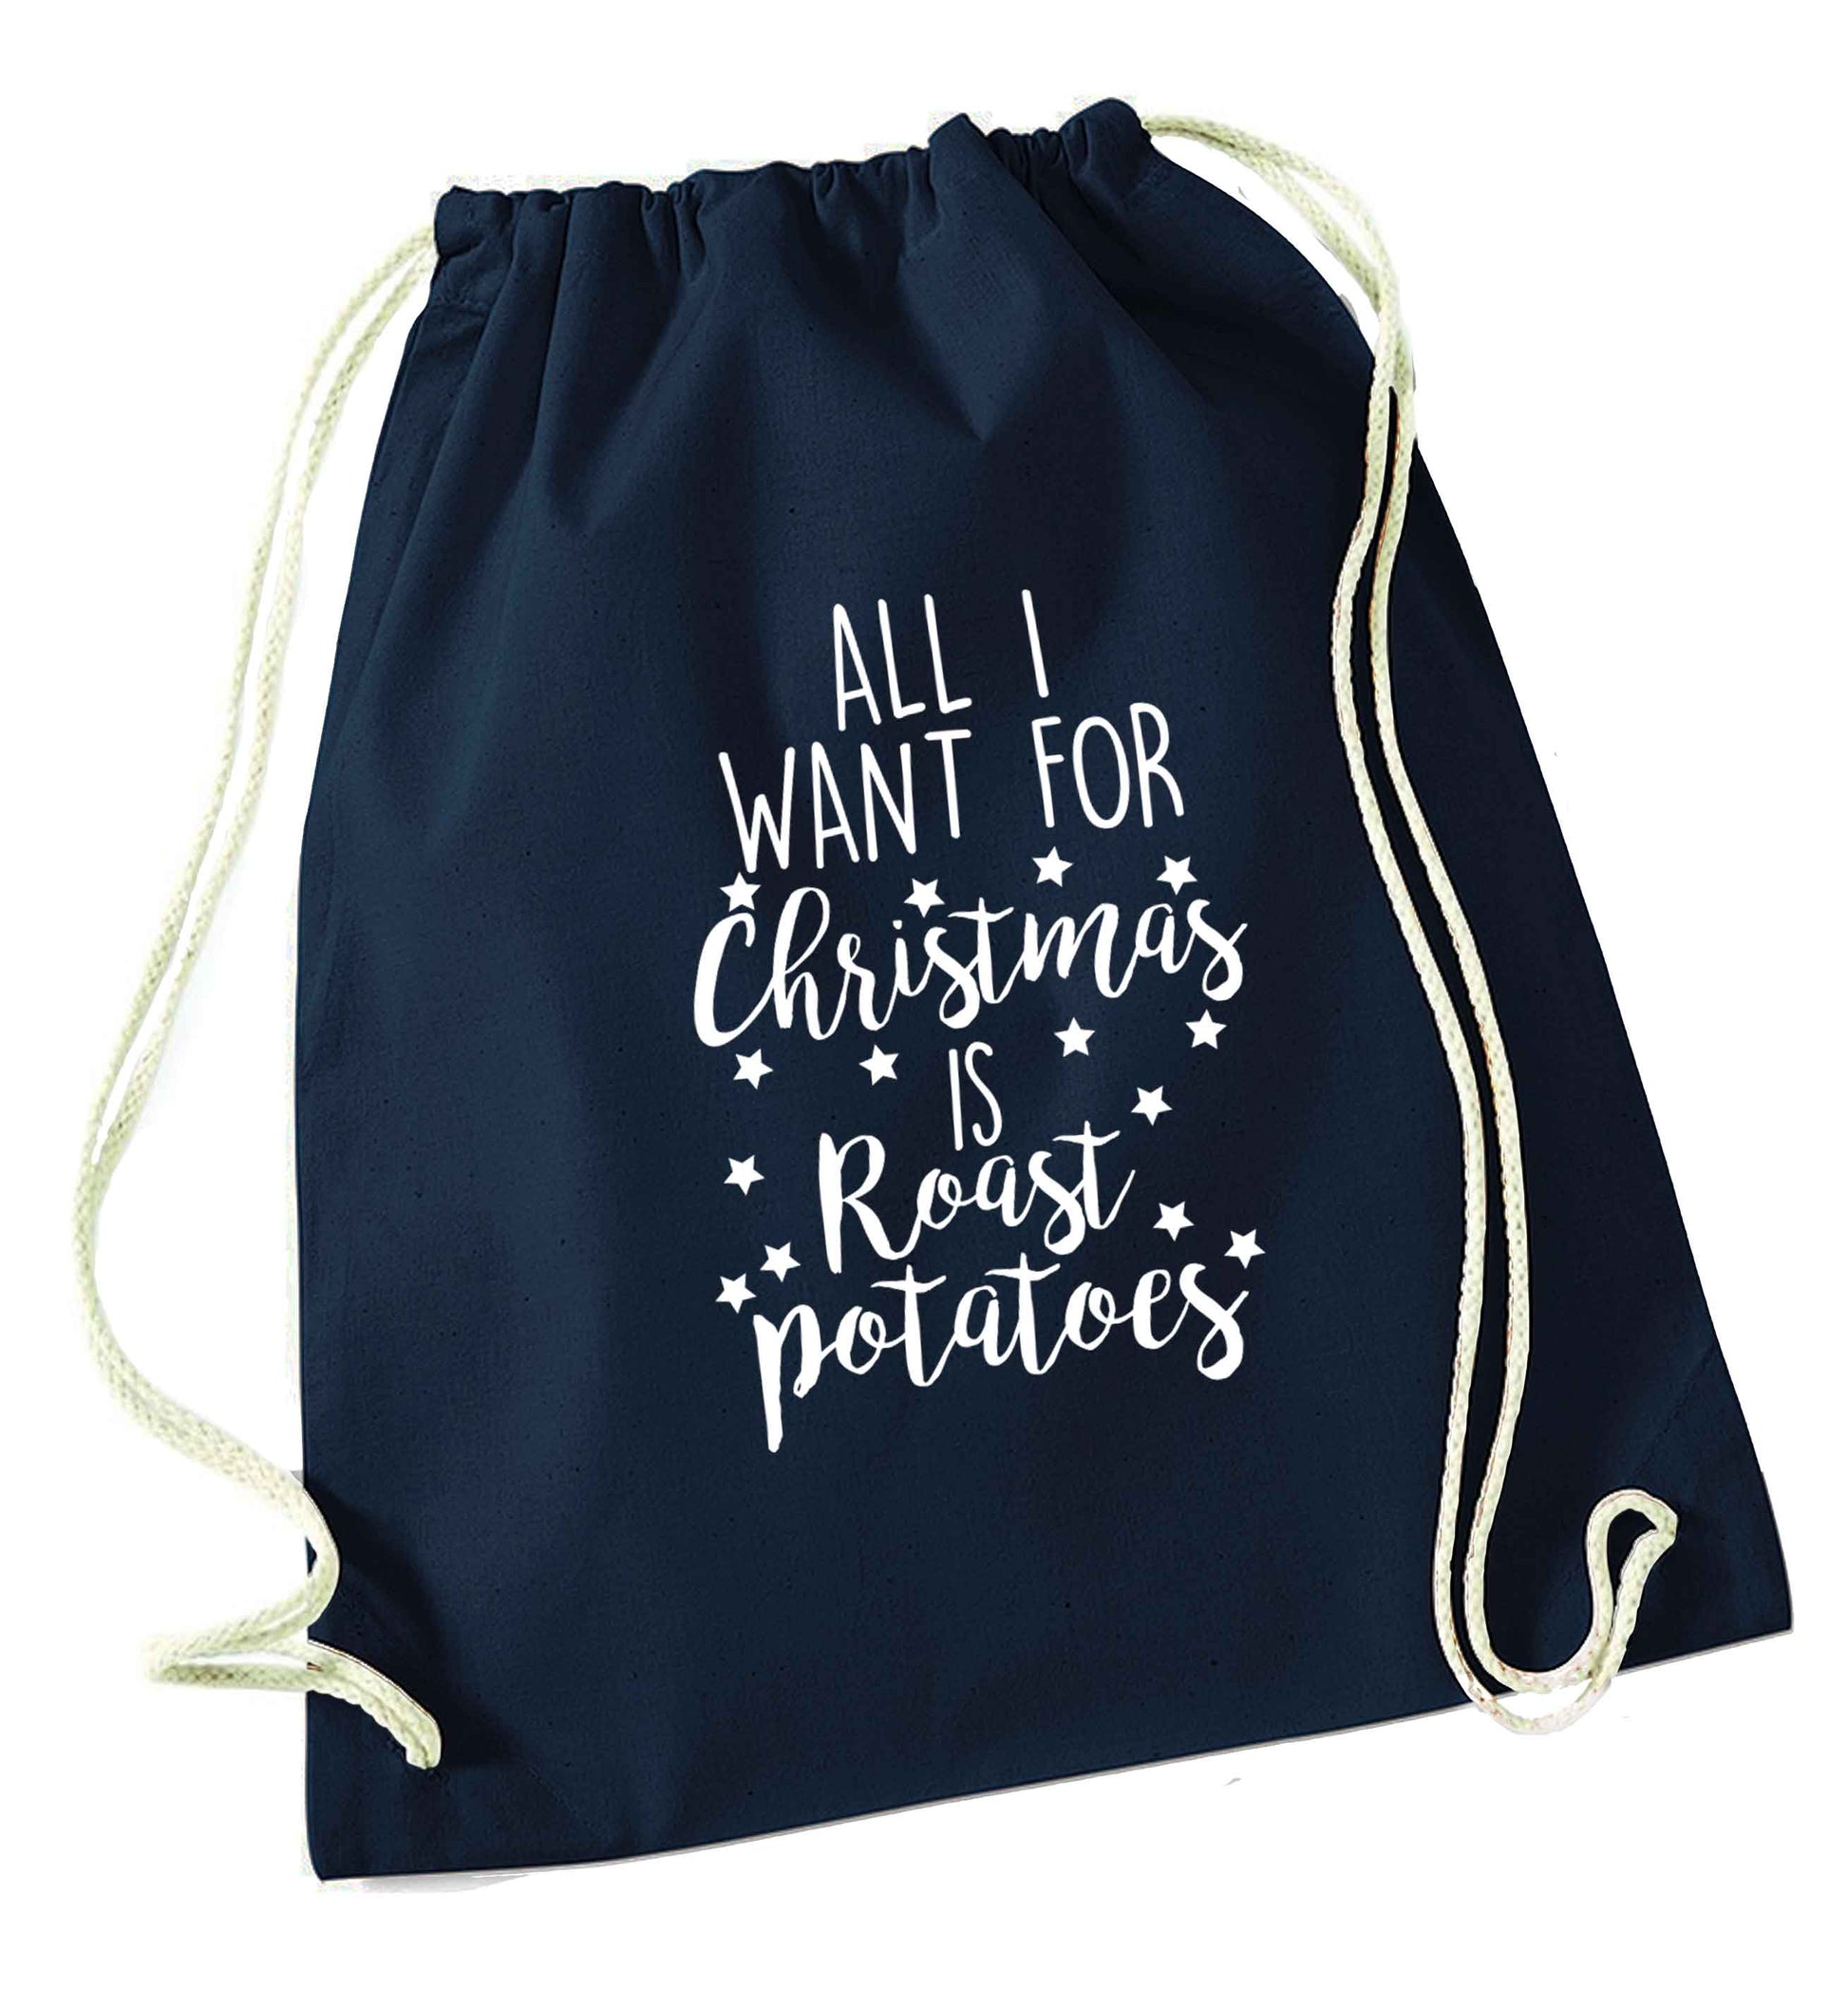 All I want for Christmas is roast potatoes navy drawstring bag